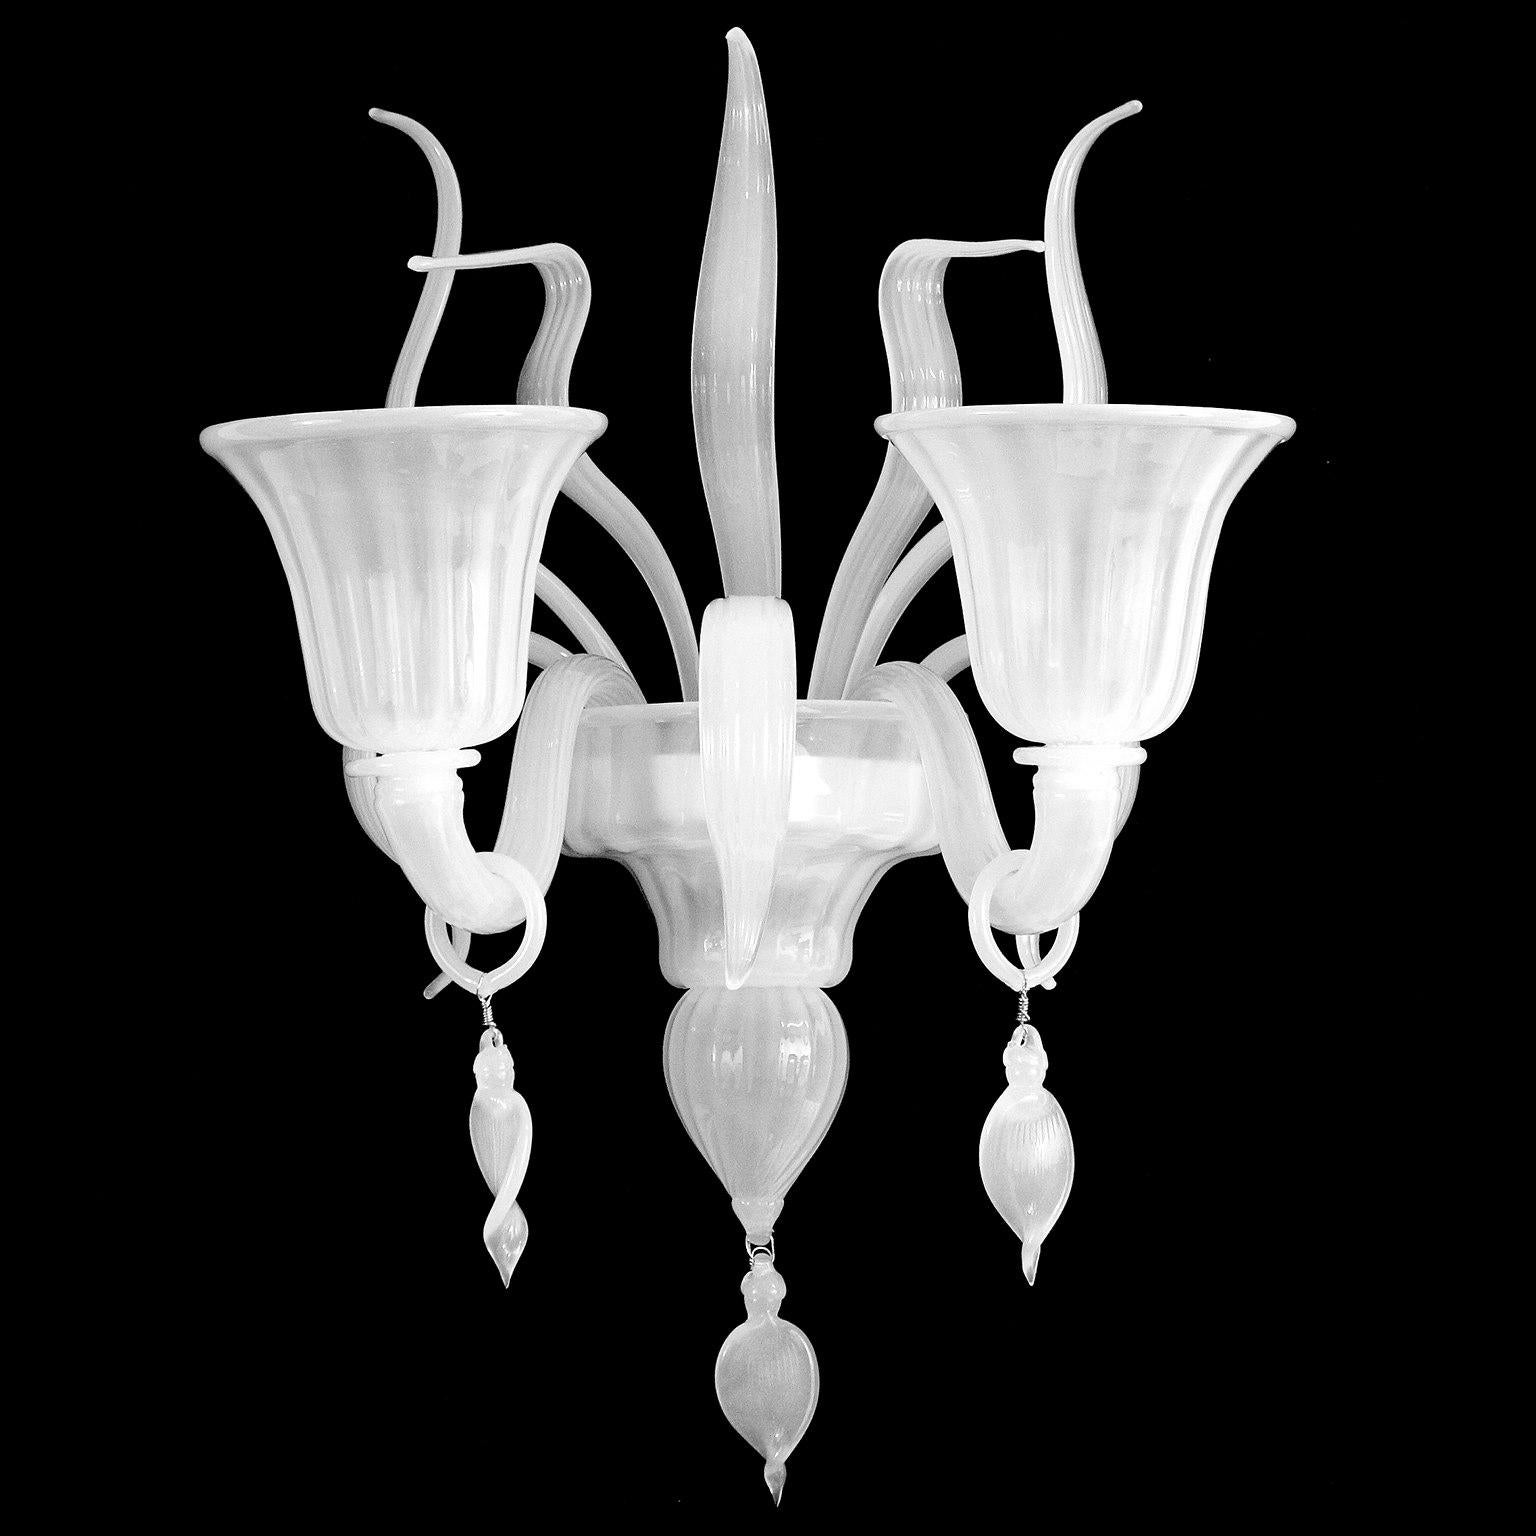 Sconce 2 arms white silk Murano glass with leaves and pendants by Multiforme

The collection Fluage is the perfect combination between the Venetian tradition and the most refined design. To manufacture the blown glass chandelier Fluage, different